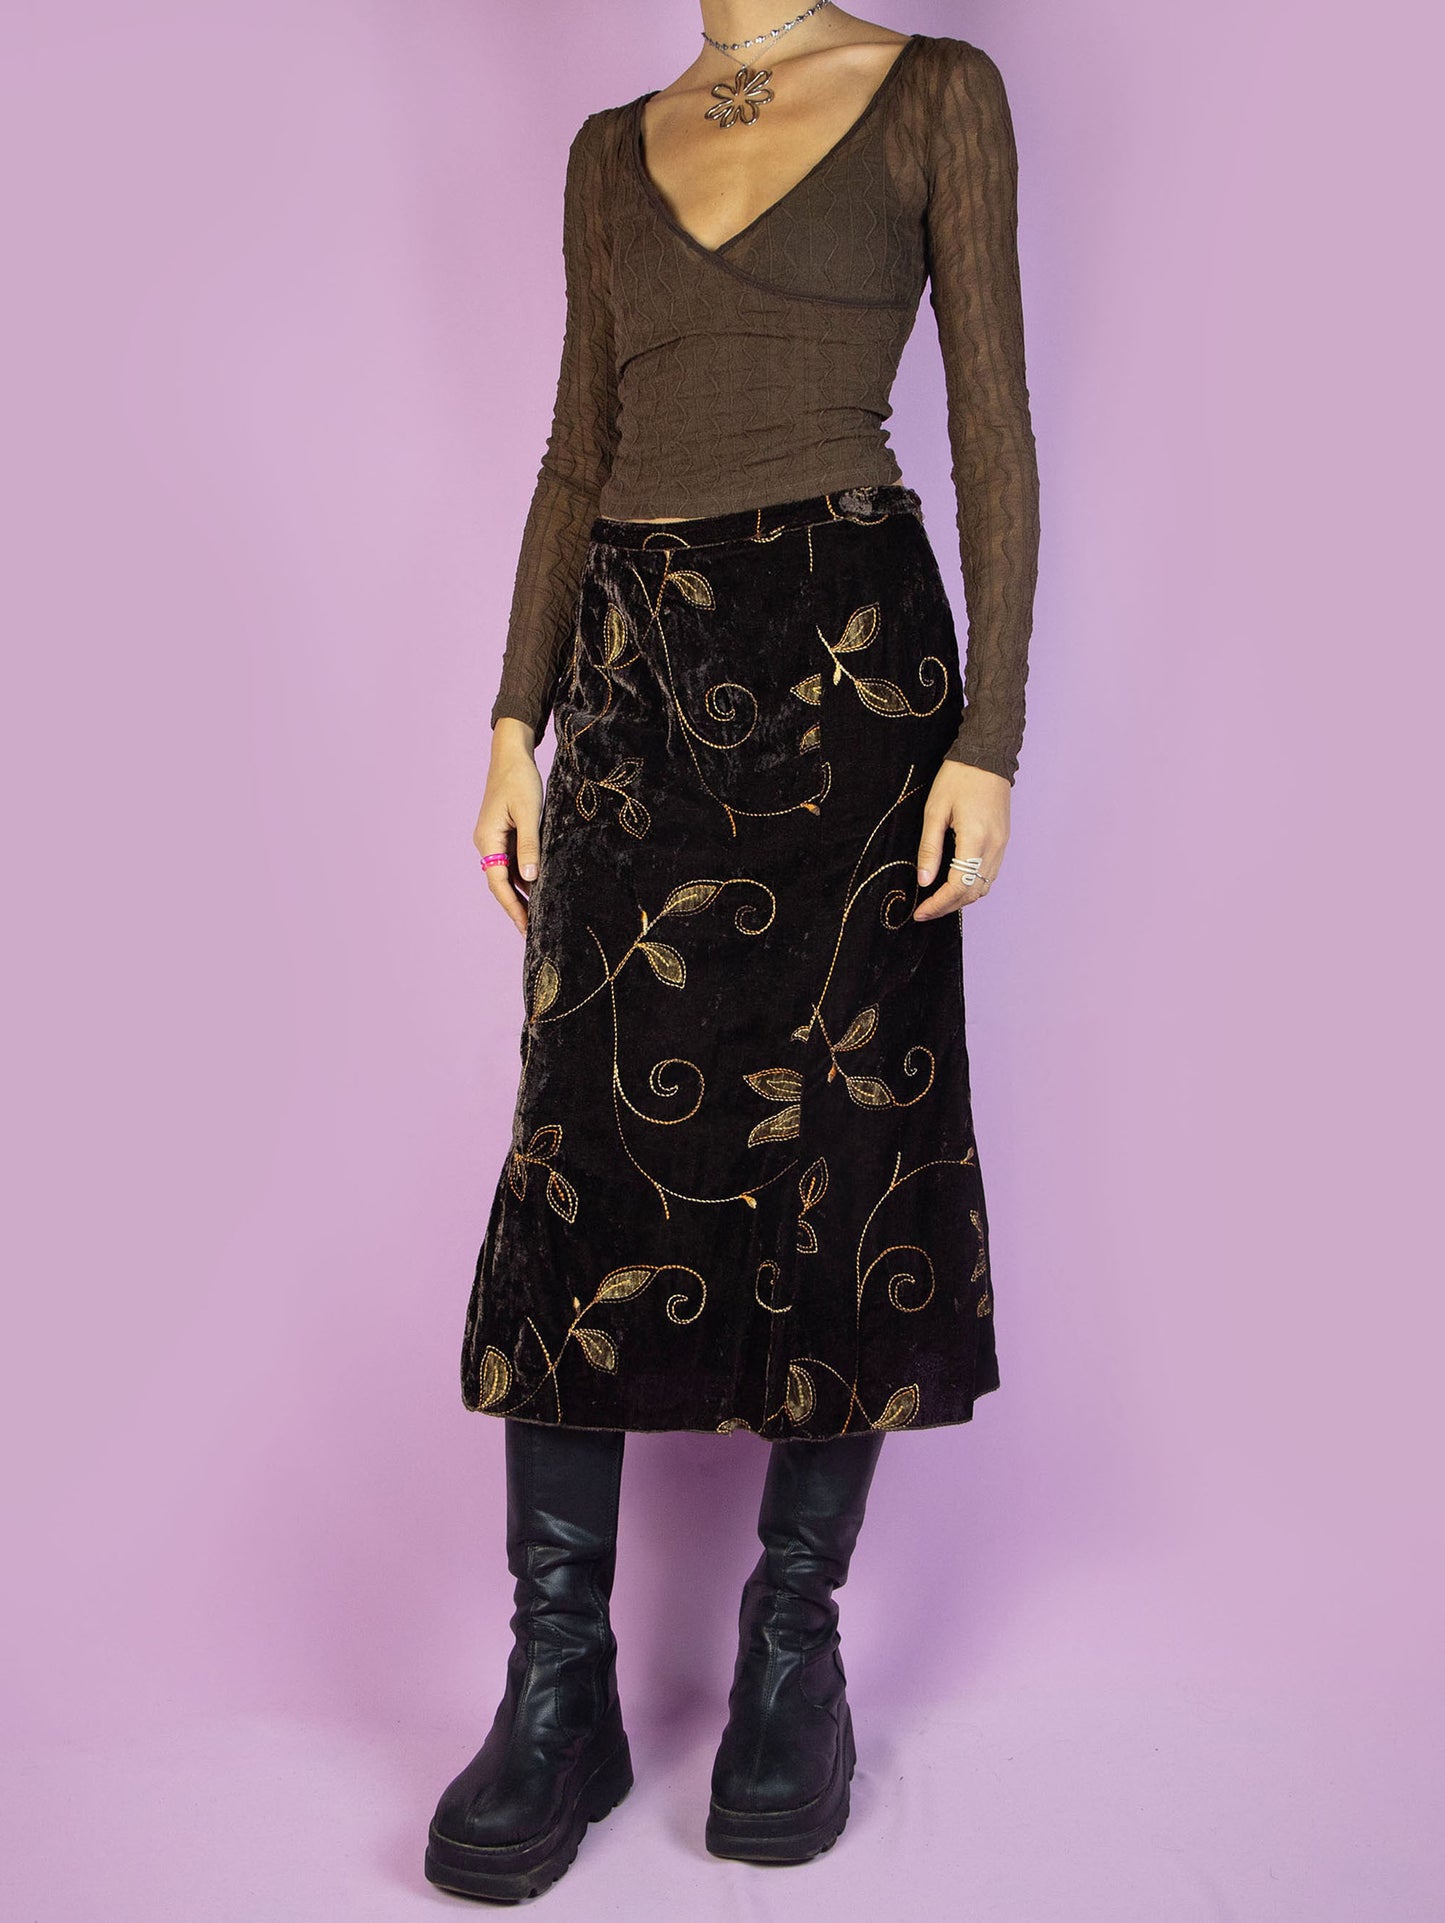 The Vintage 90s Brown Velvet Midi Skirt is a dark brown velvet flared skirt with floral embroidered details and side zipper closure. Gorgeous fairy grunge whimsygoth style 1990s boho skirt.